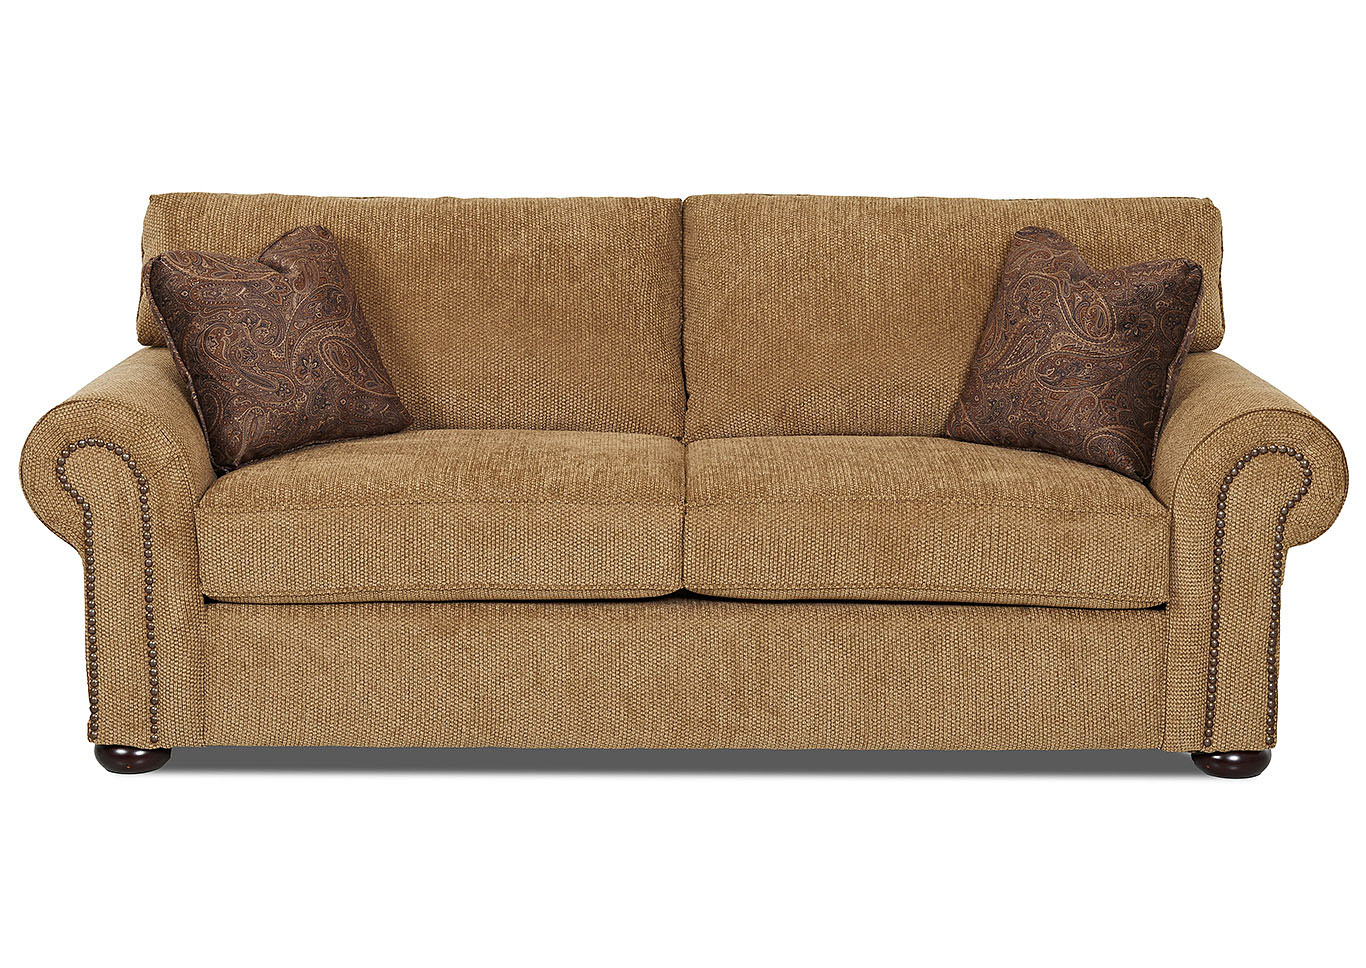 Sienna French Camel Stationary Fabric Sofa,Klaussner Home Furnishings